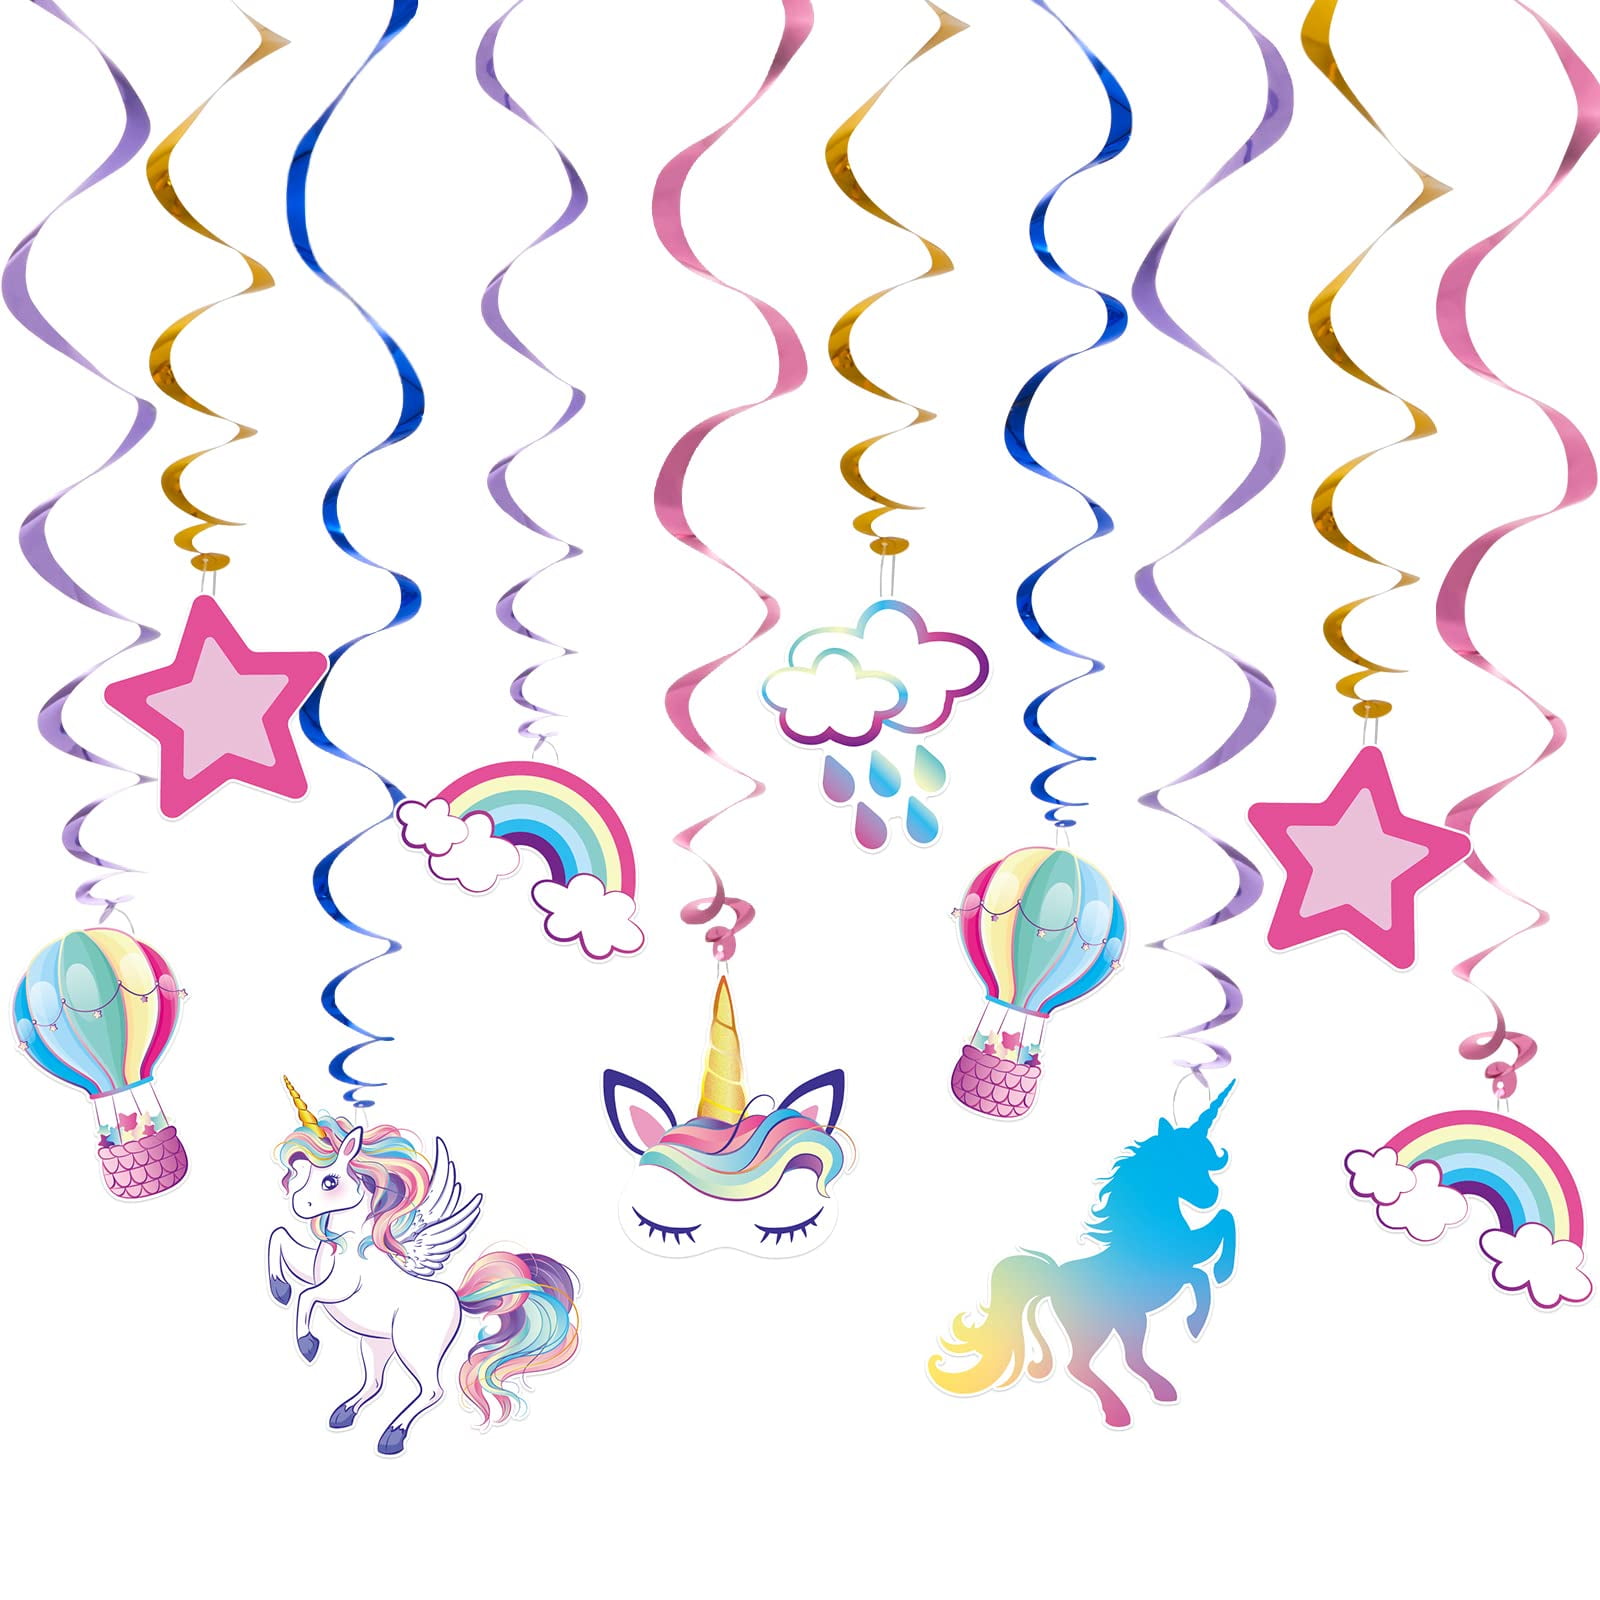 Cool Unicorn Party Idea: Balloon Cloud and Rainbow Streamers